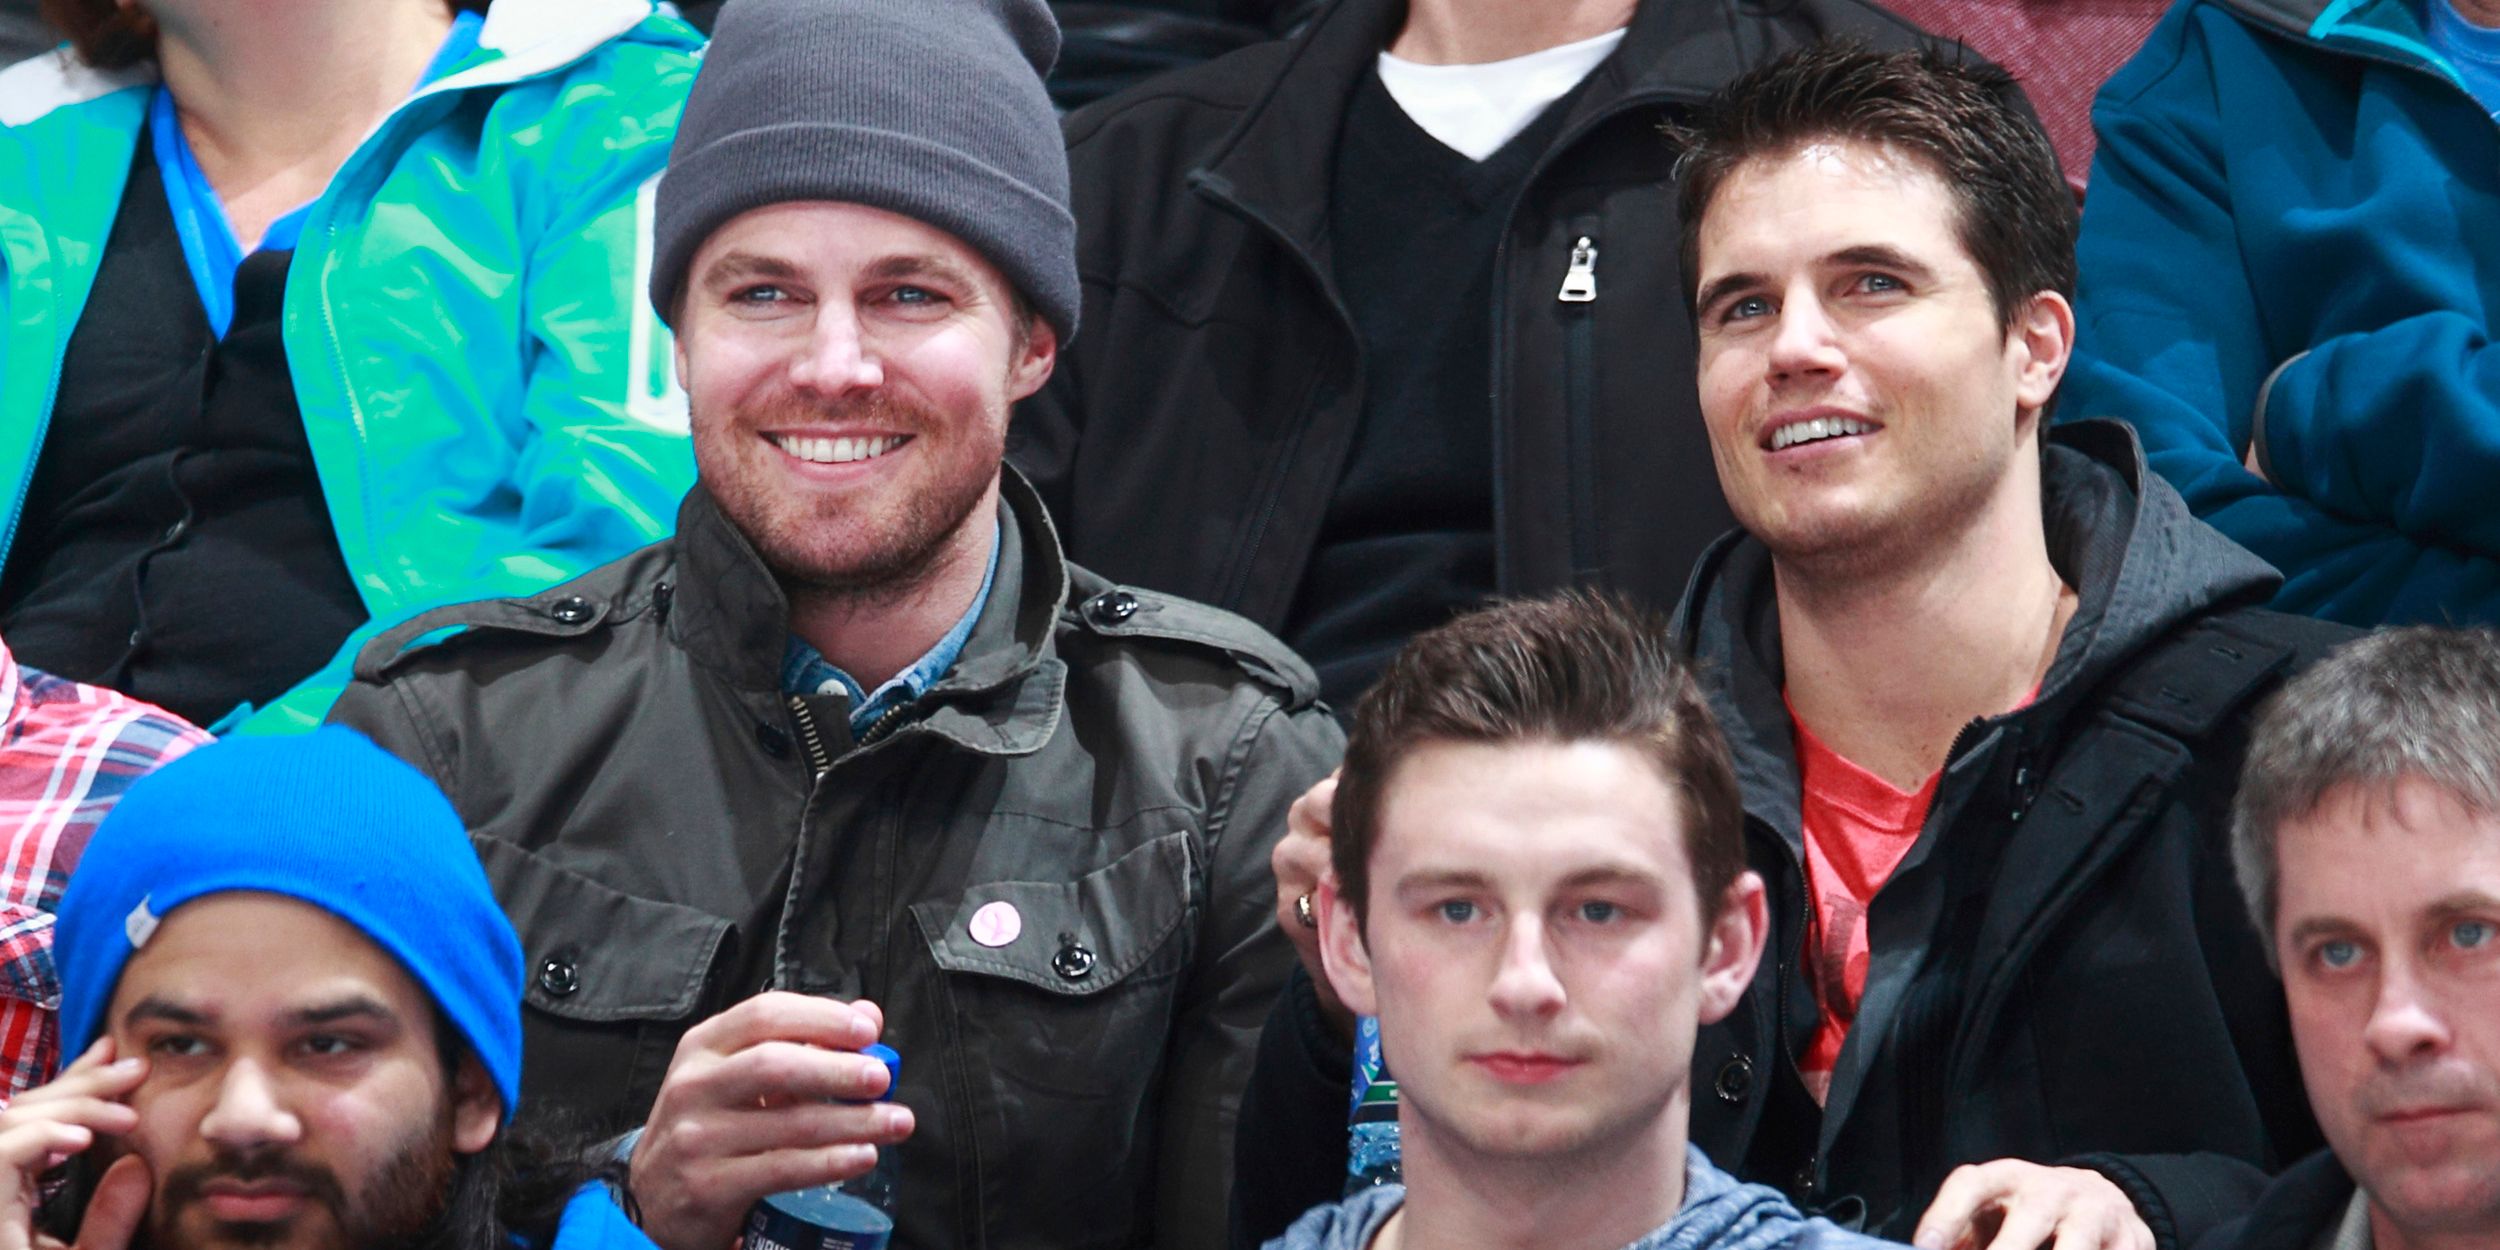 Stephen and Robbie Amell Hockey Game